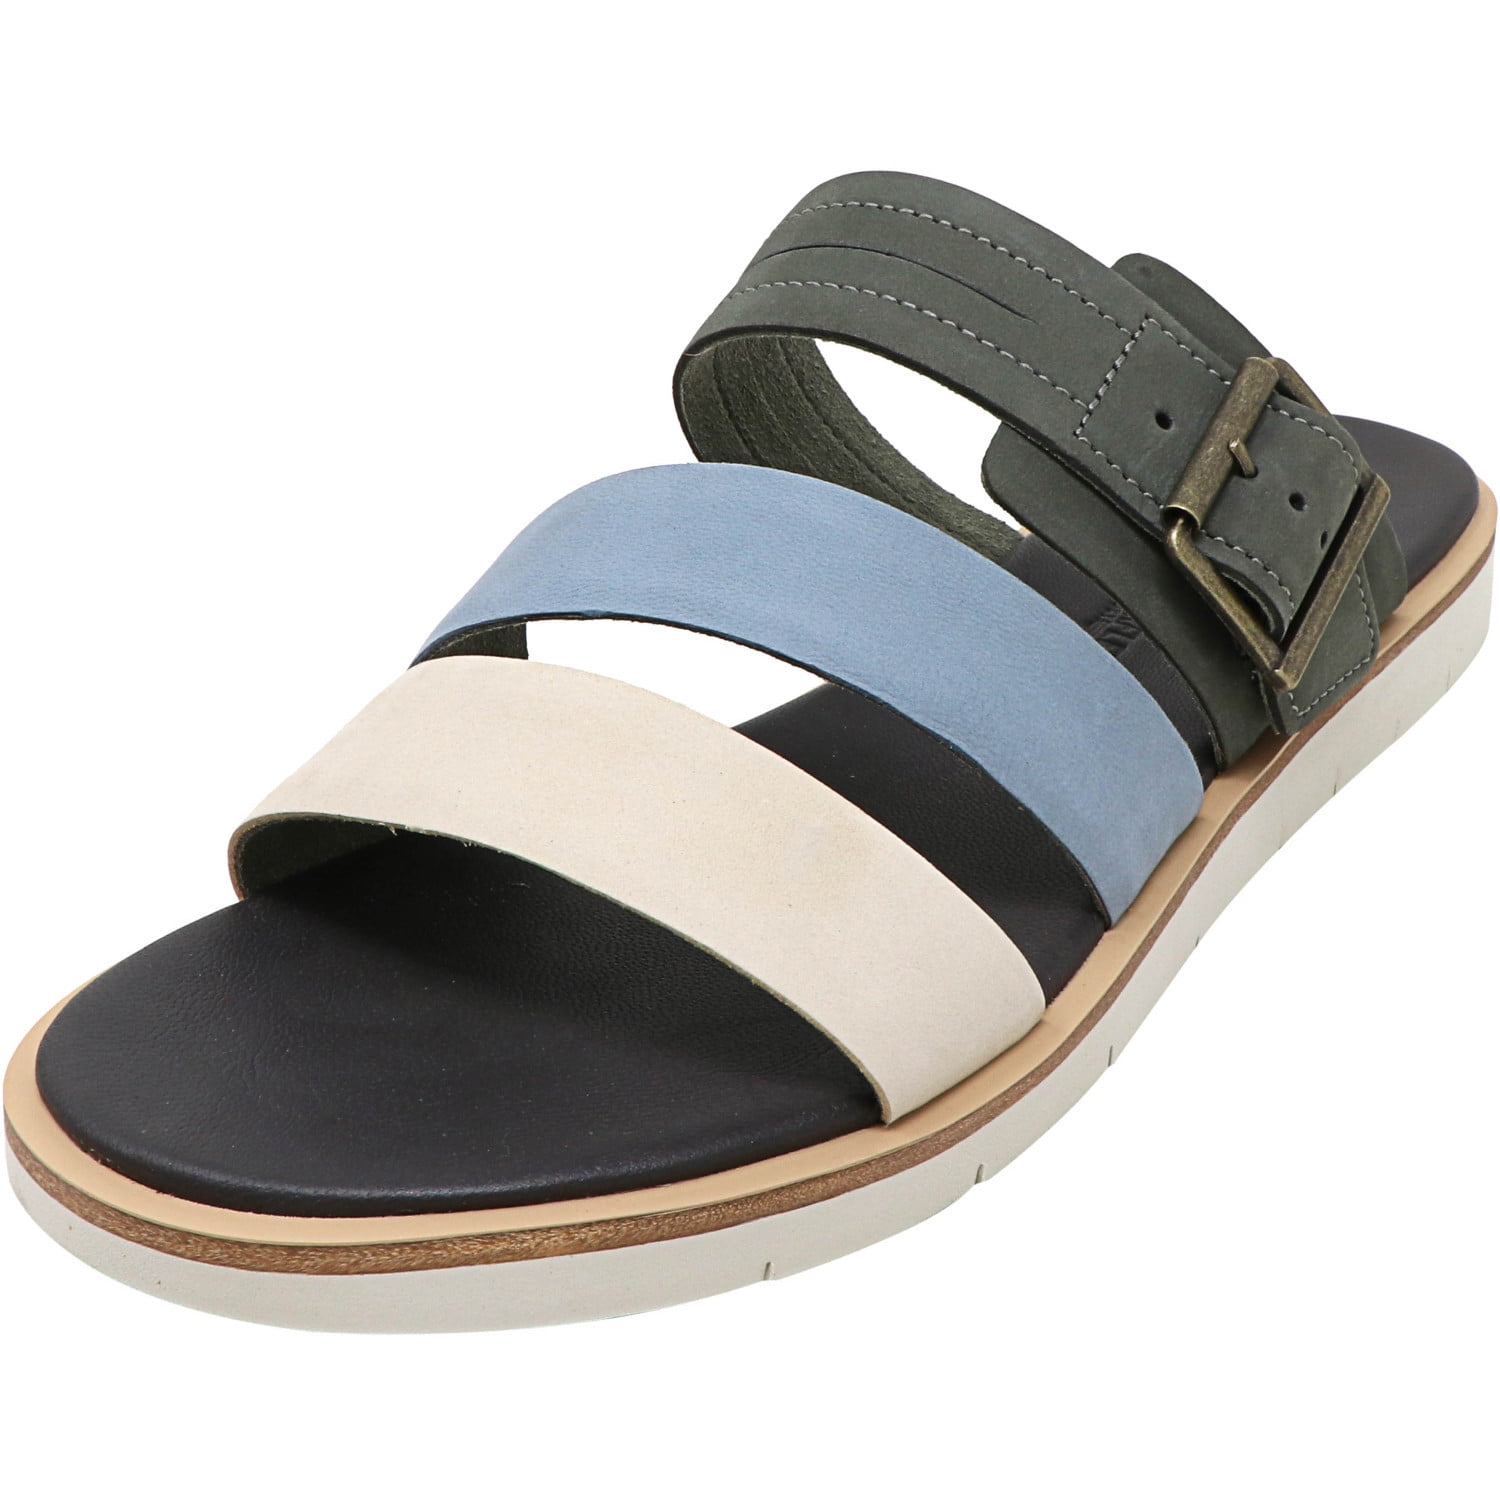 timberland ladies leather sandals